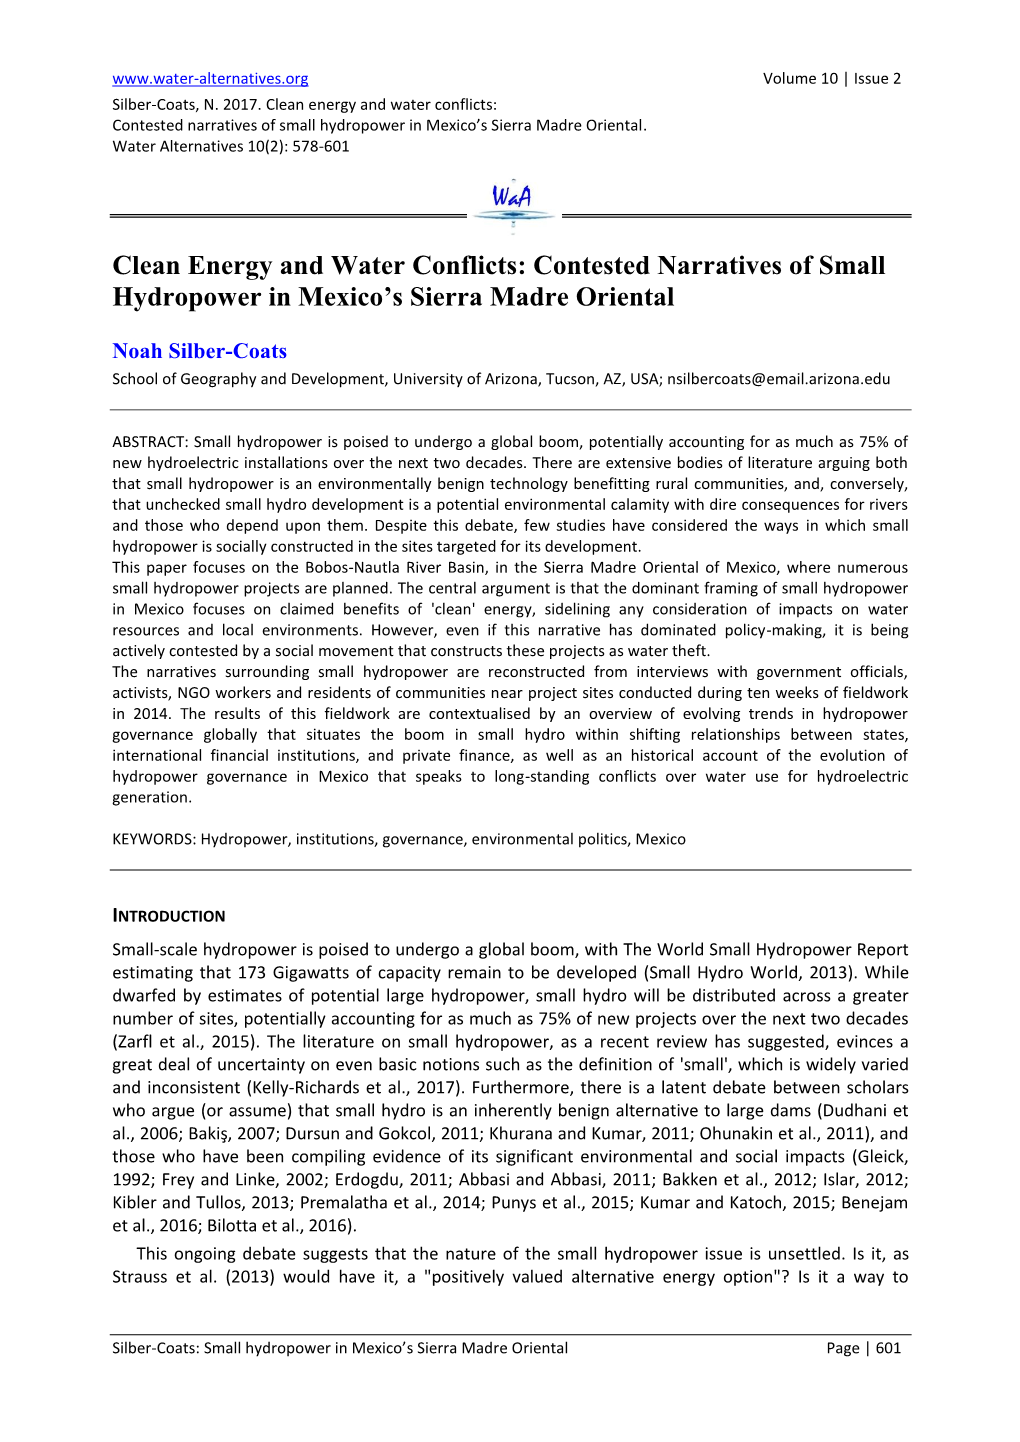 Contested Narratives of Small Hydropower in Mexico's Sierra Madre Oriental